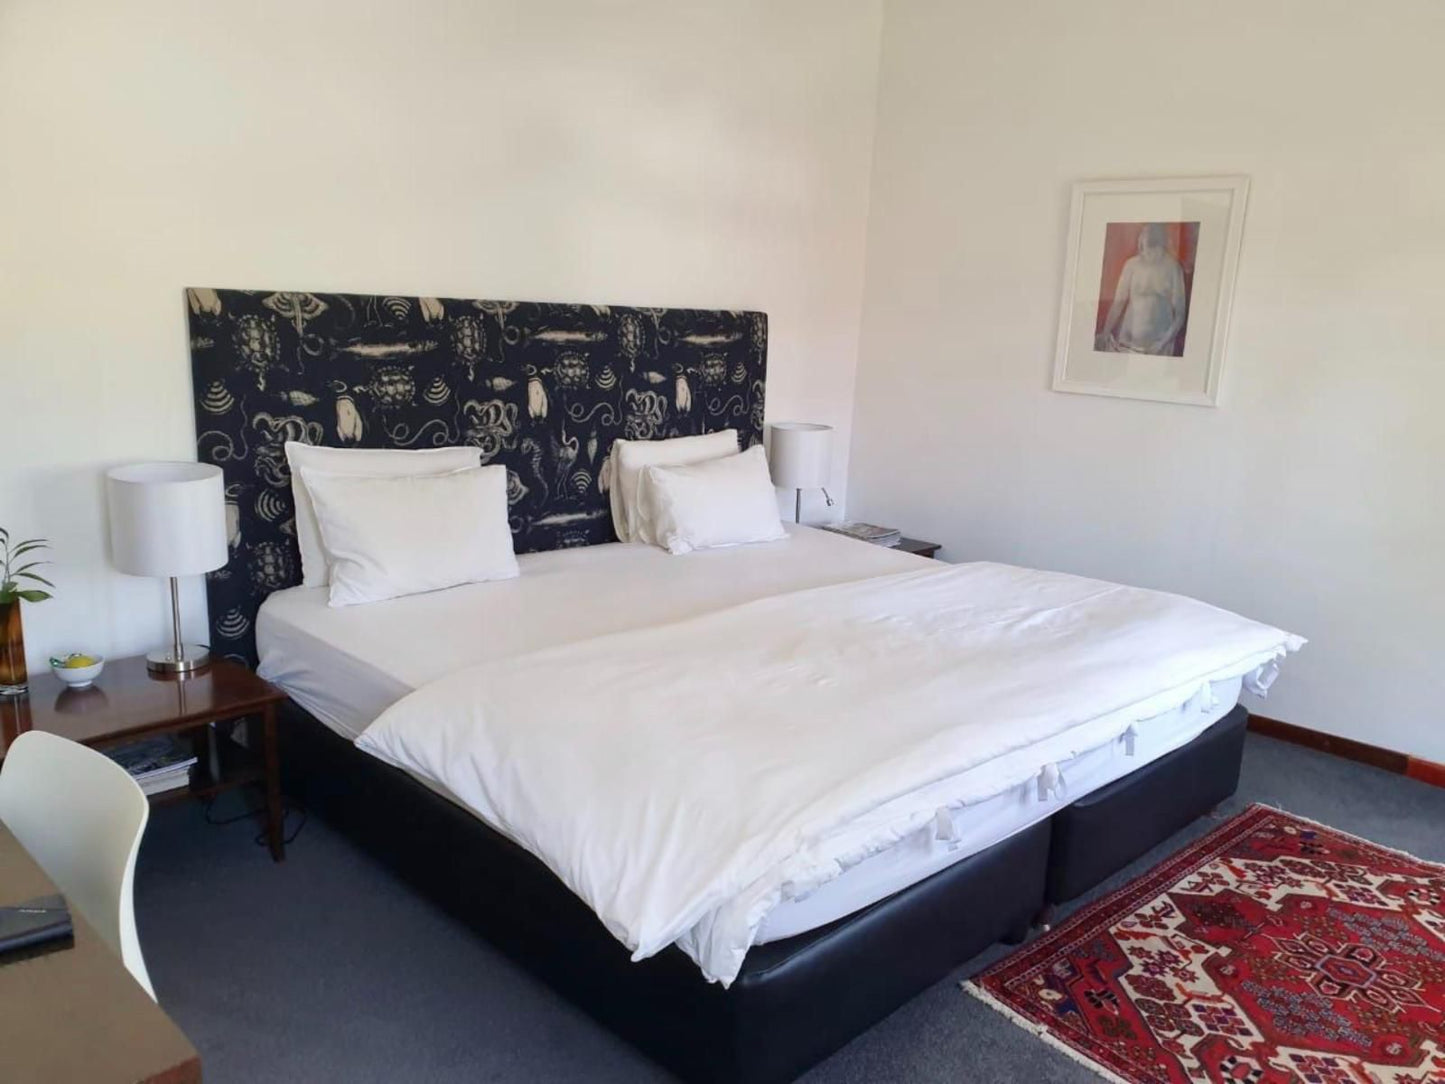 Le Must River Residence Upington Northern Cape South Africa Bedroom